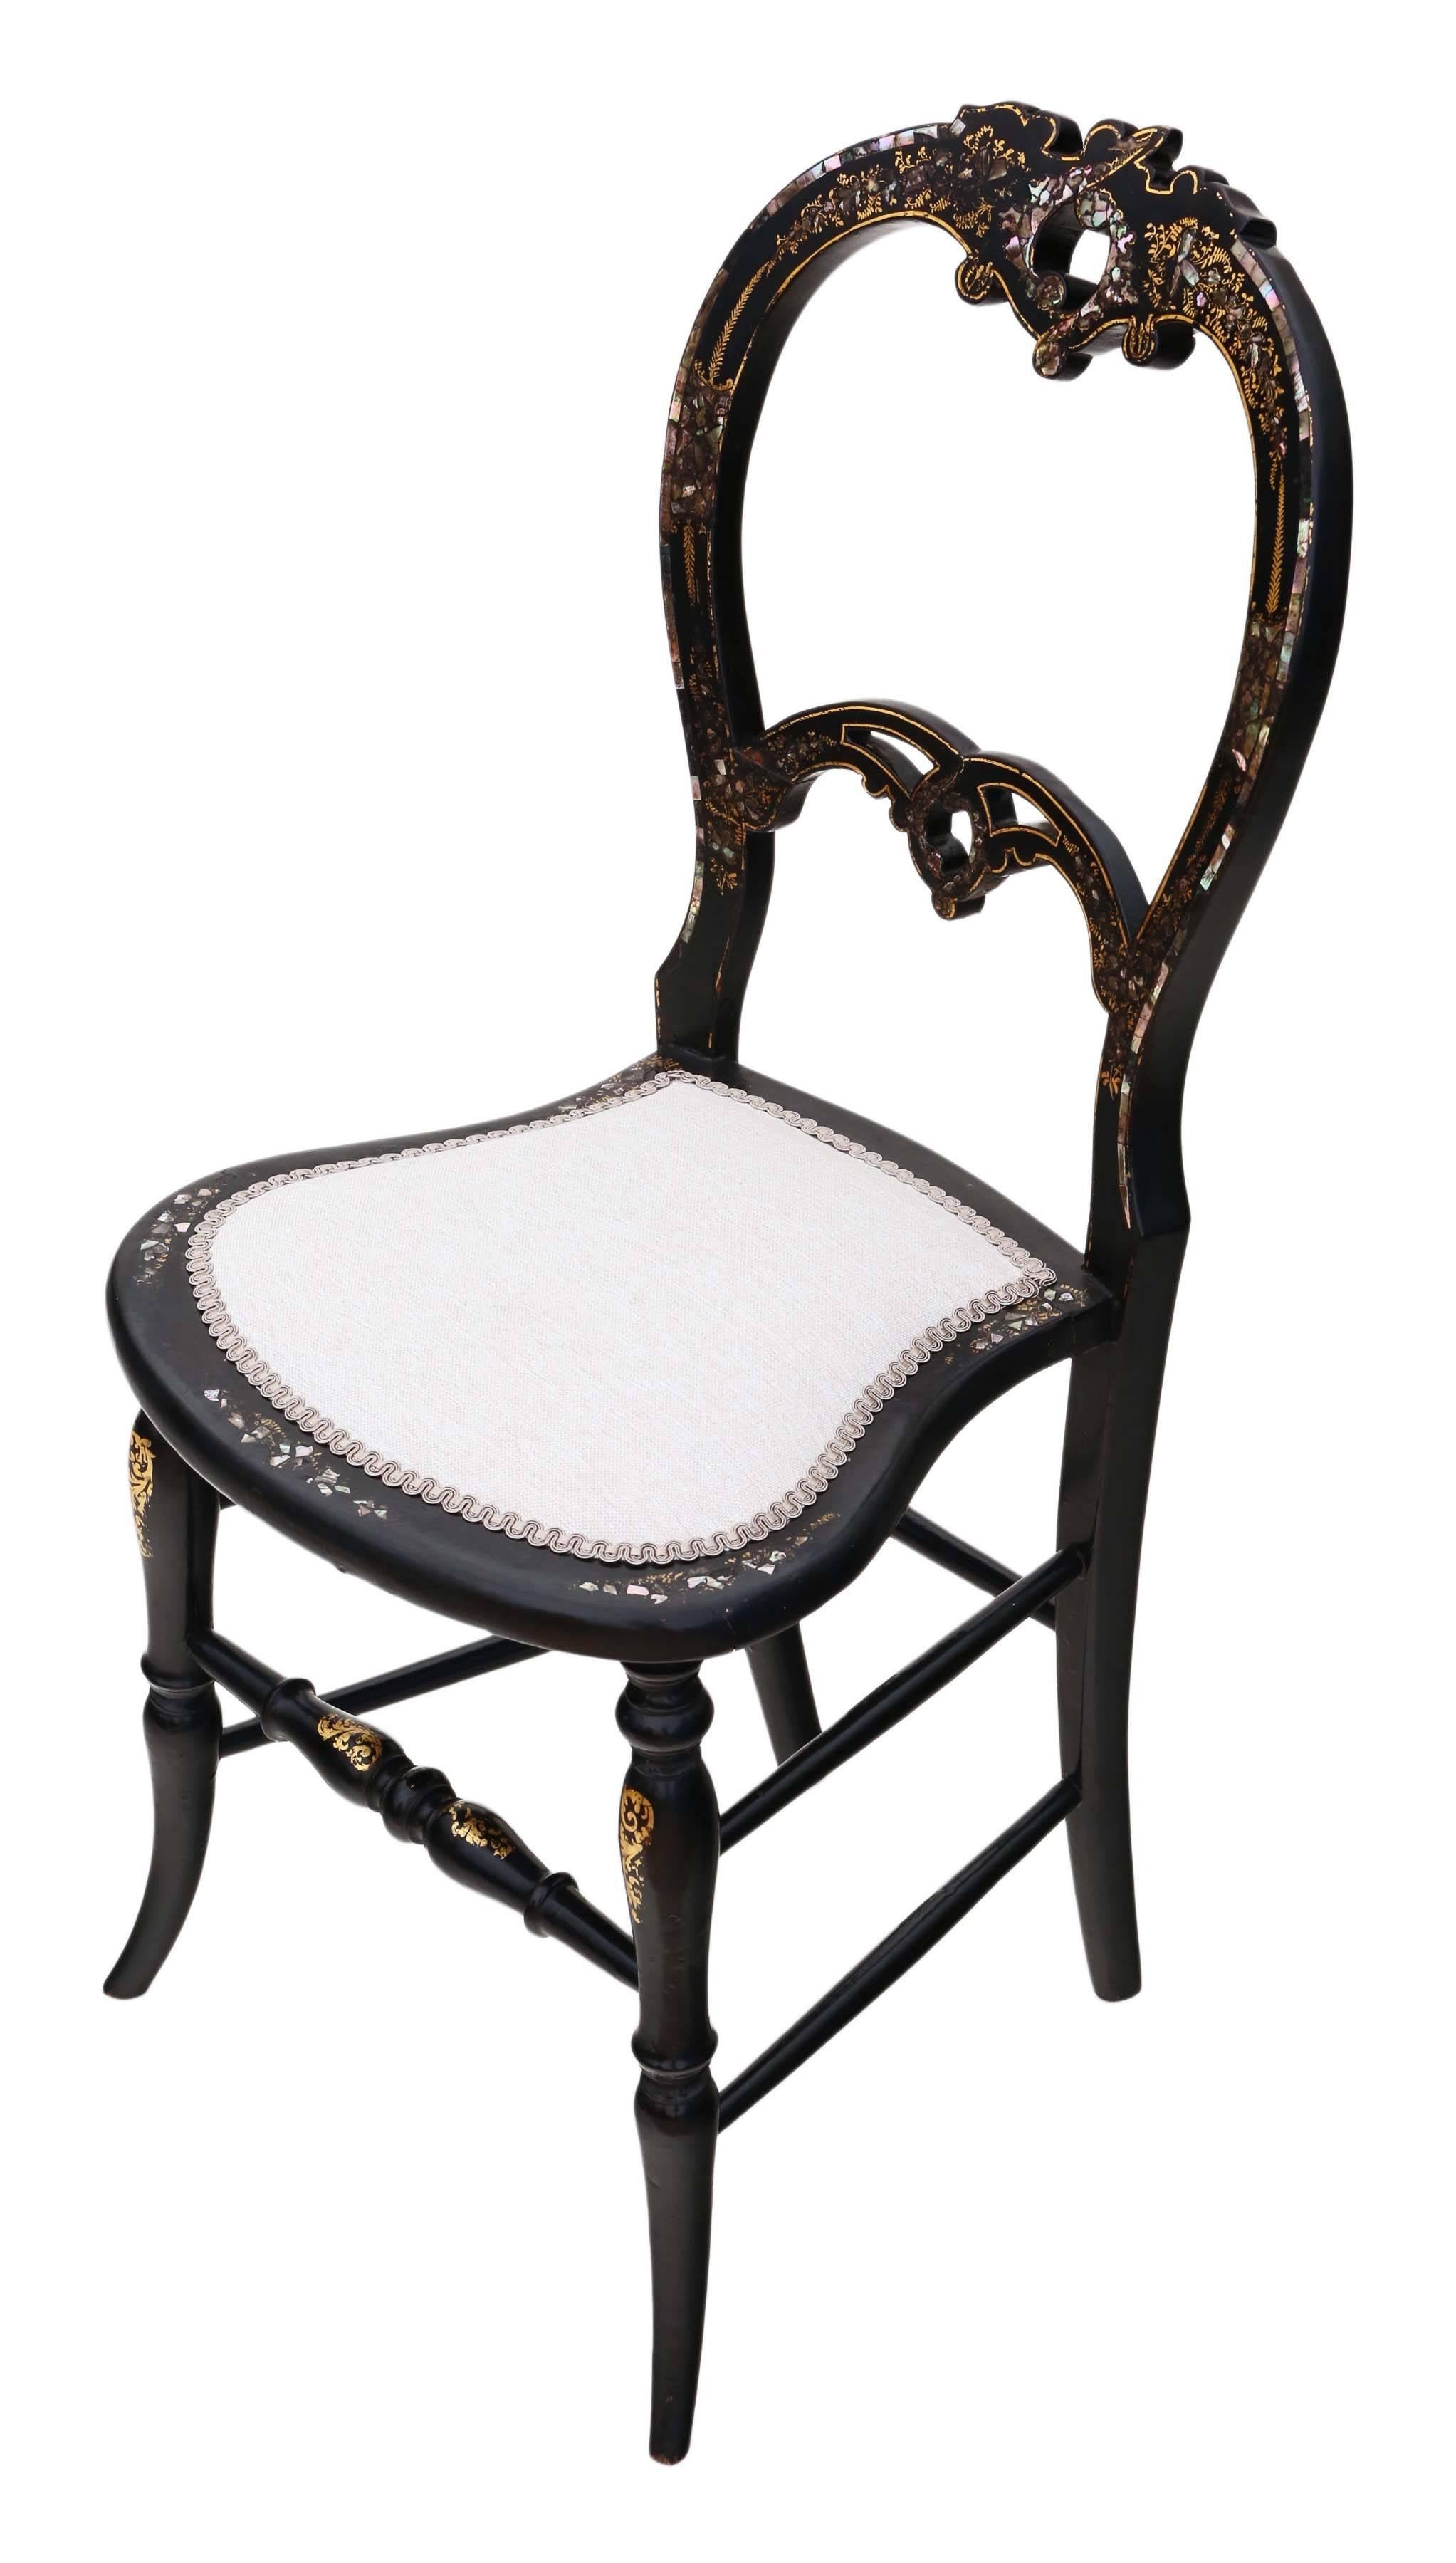 Antique rare Victorian mother-of-pearl inlaid bedroom side chair. Came from the Master's Lodge, Trinity College, Cambridge.

Dates from circa 1890. Fantastic quality decorative piece, with amazing inlays and gilt paint decoration.

Solid and